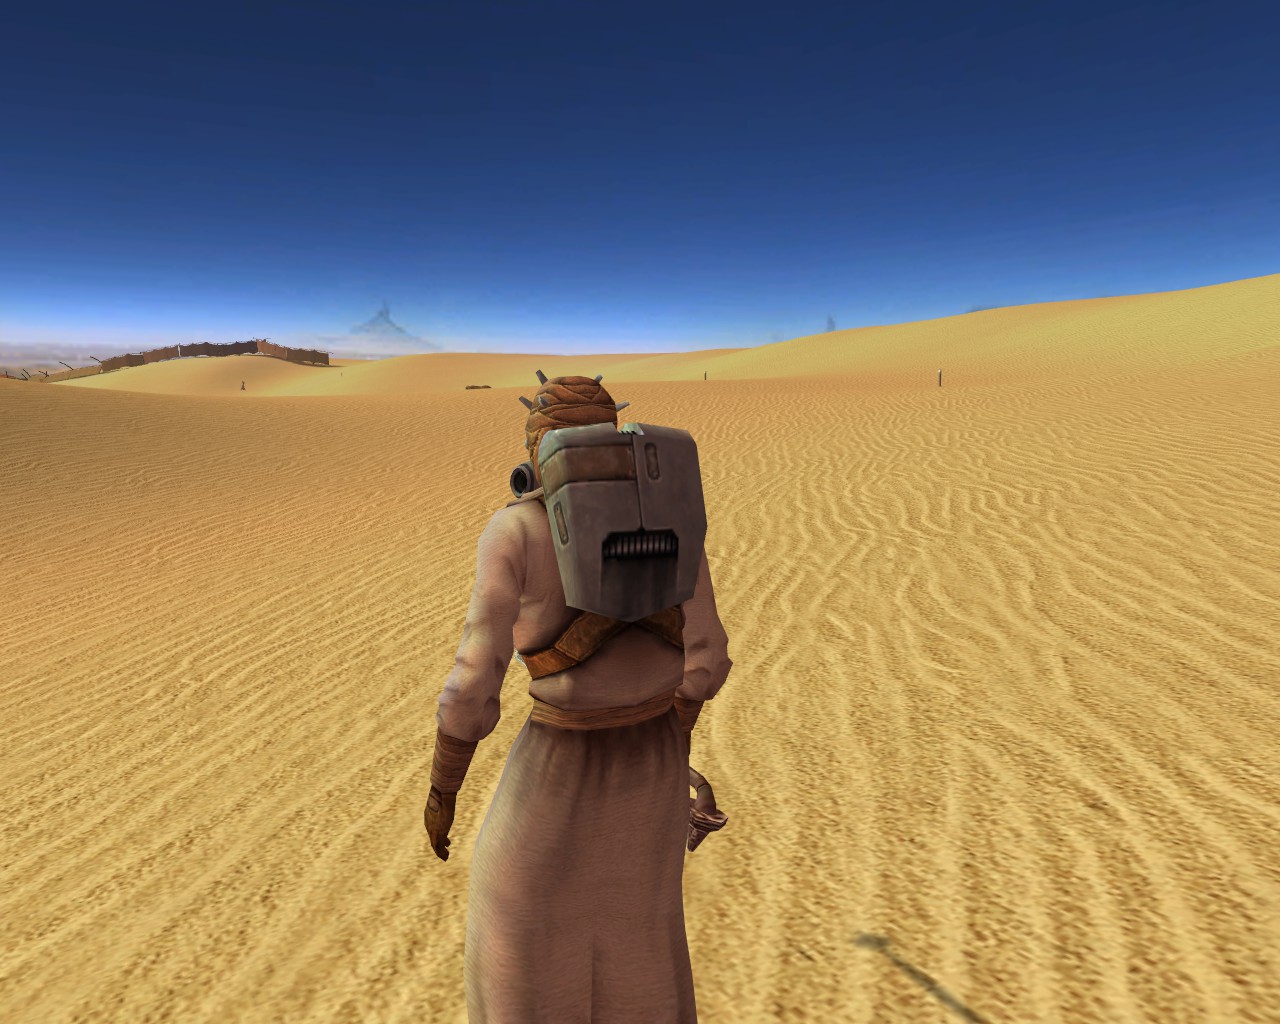 KotOR Sand People reference photos